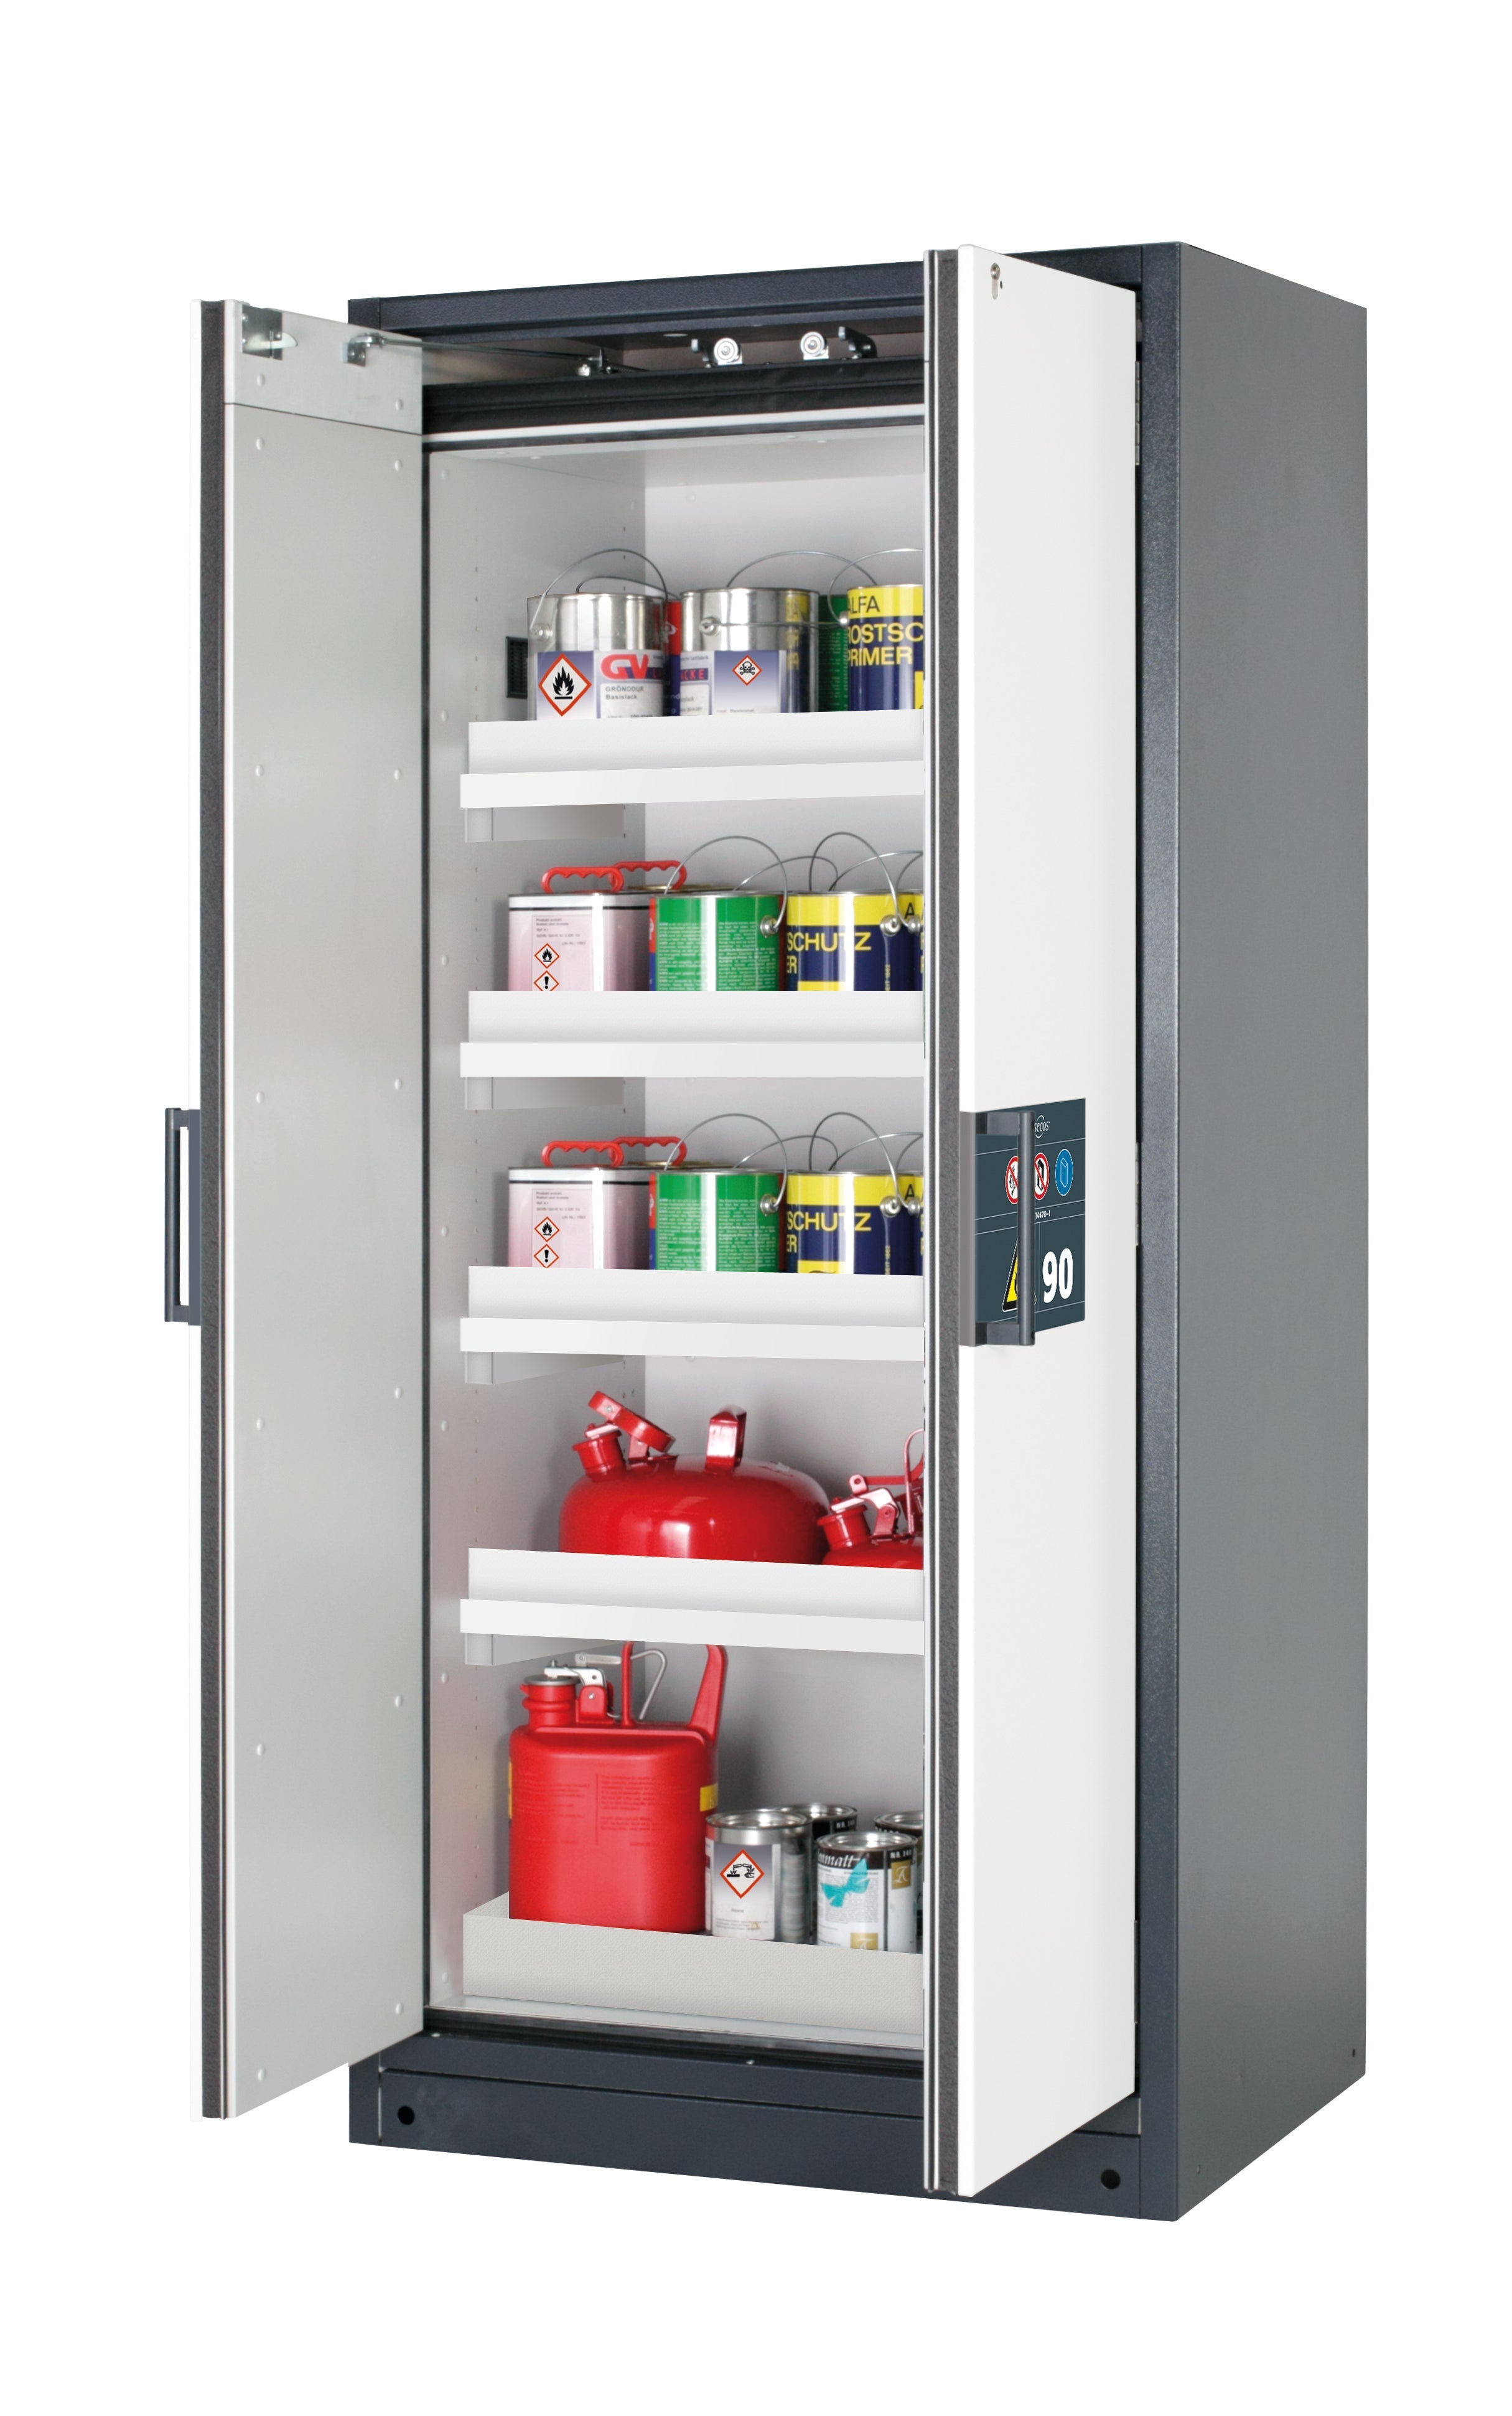 Type 90 safety storage cabinet Q-CLASSIC-90 model Q90.195.090 in pure white RAL 9010 with 4x tray shelf (standard) (polypropylene),